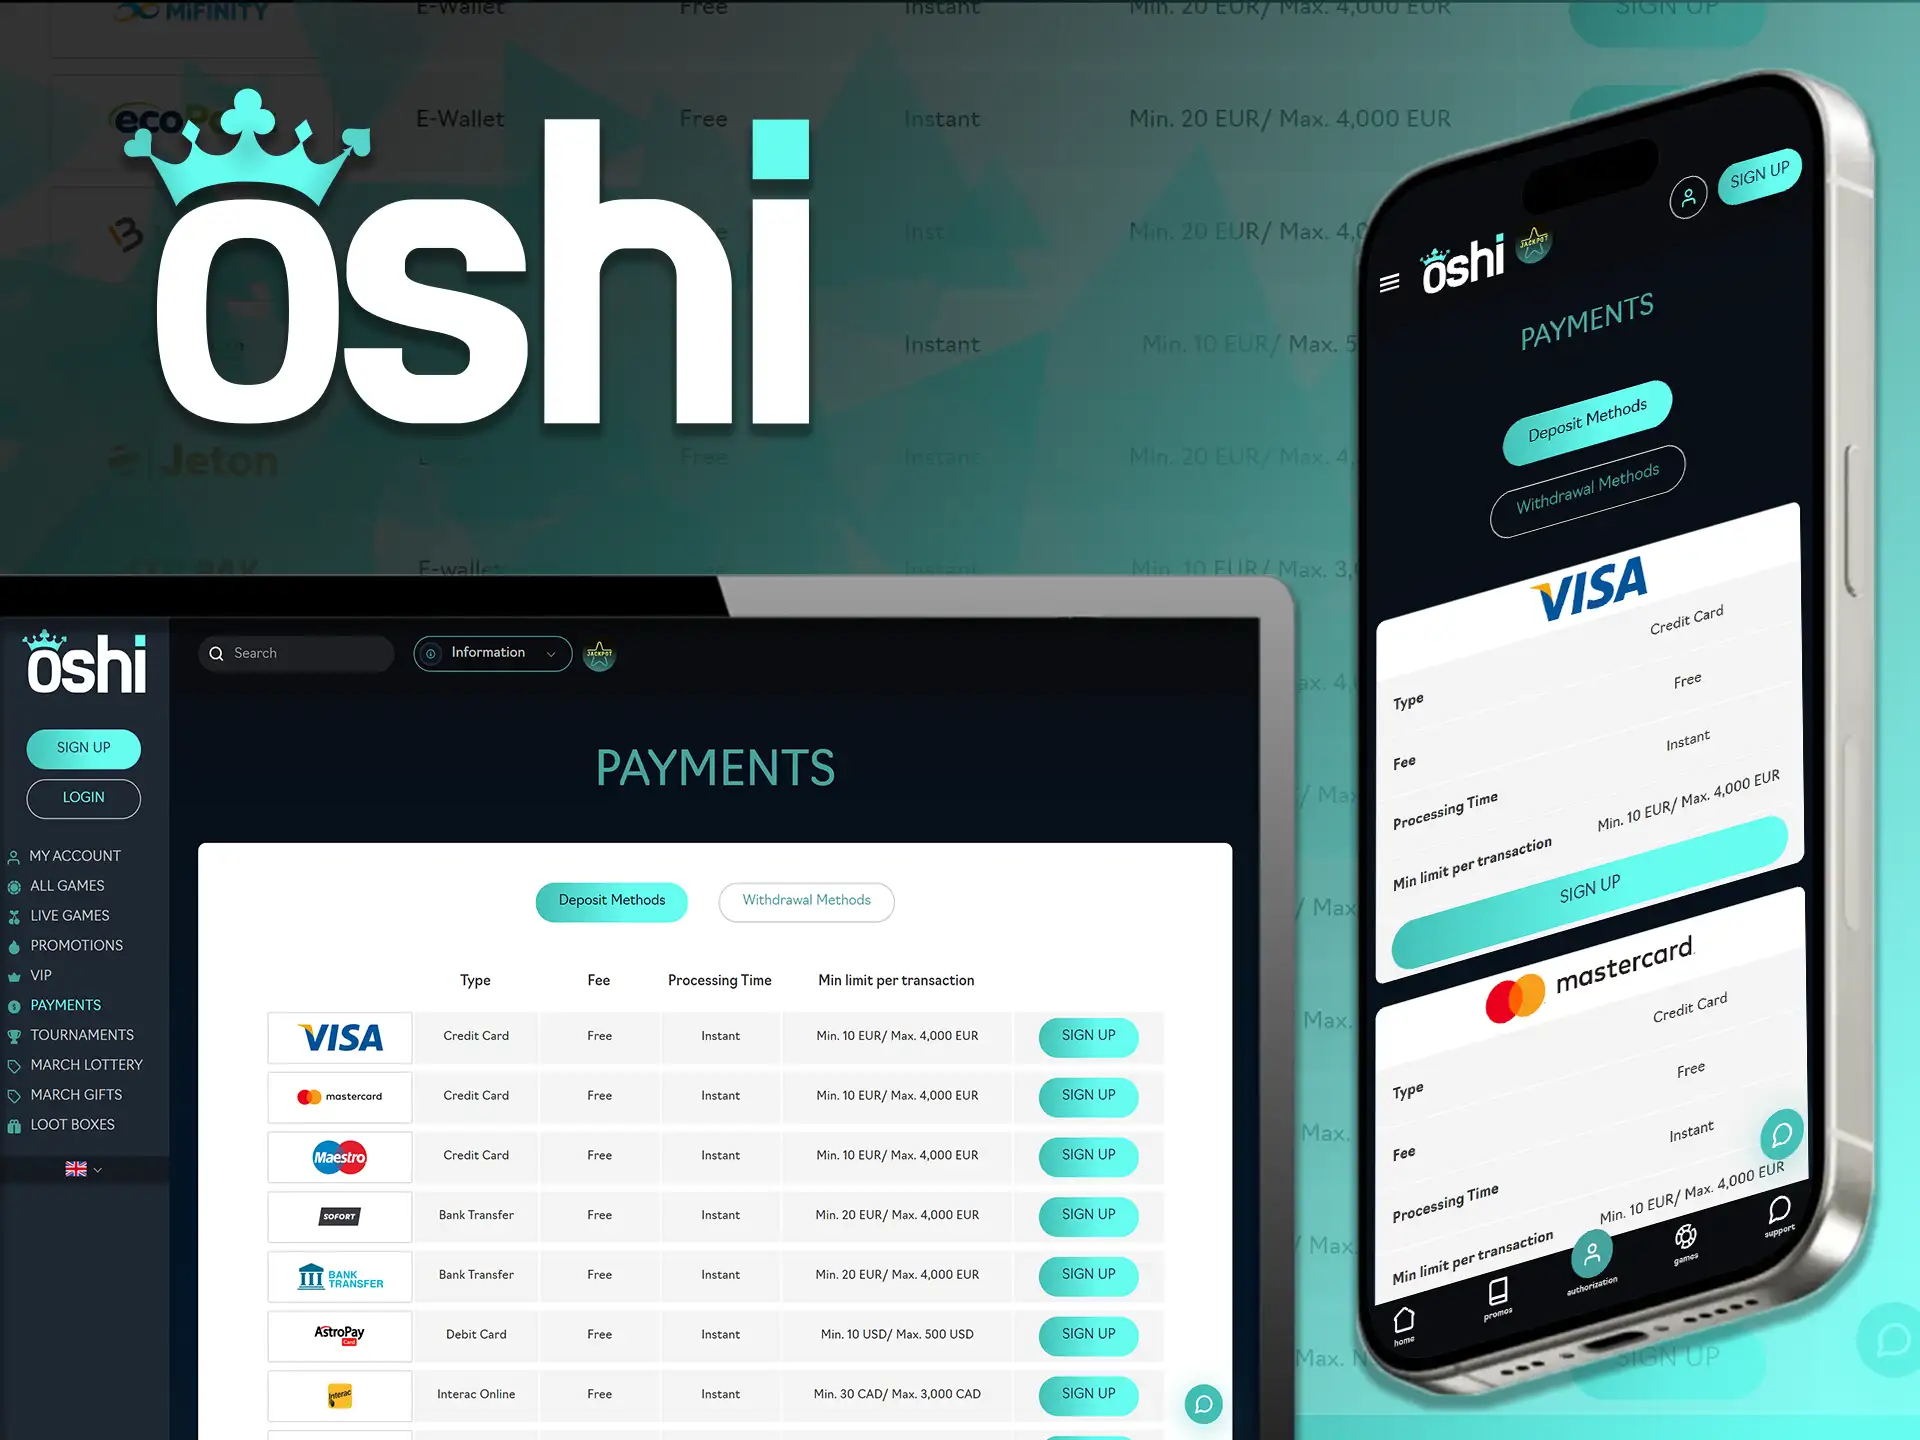 Oshi Online Casino offers fast and easy transactions for your convenience.